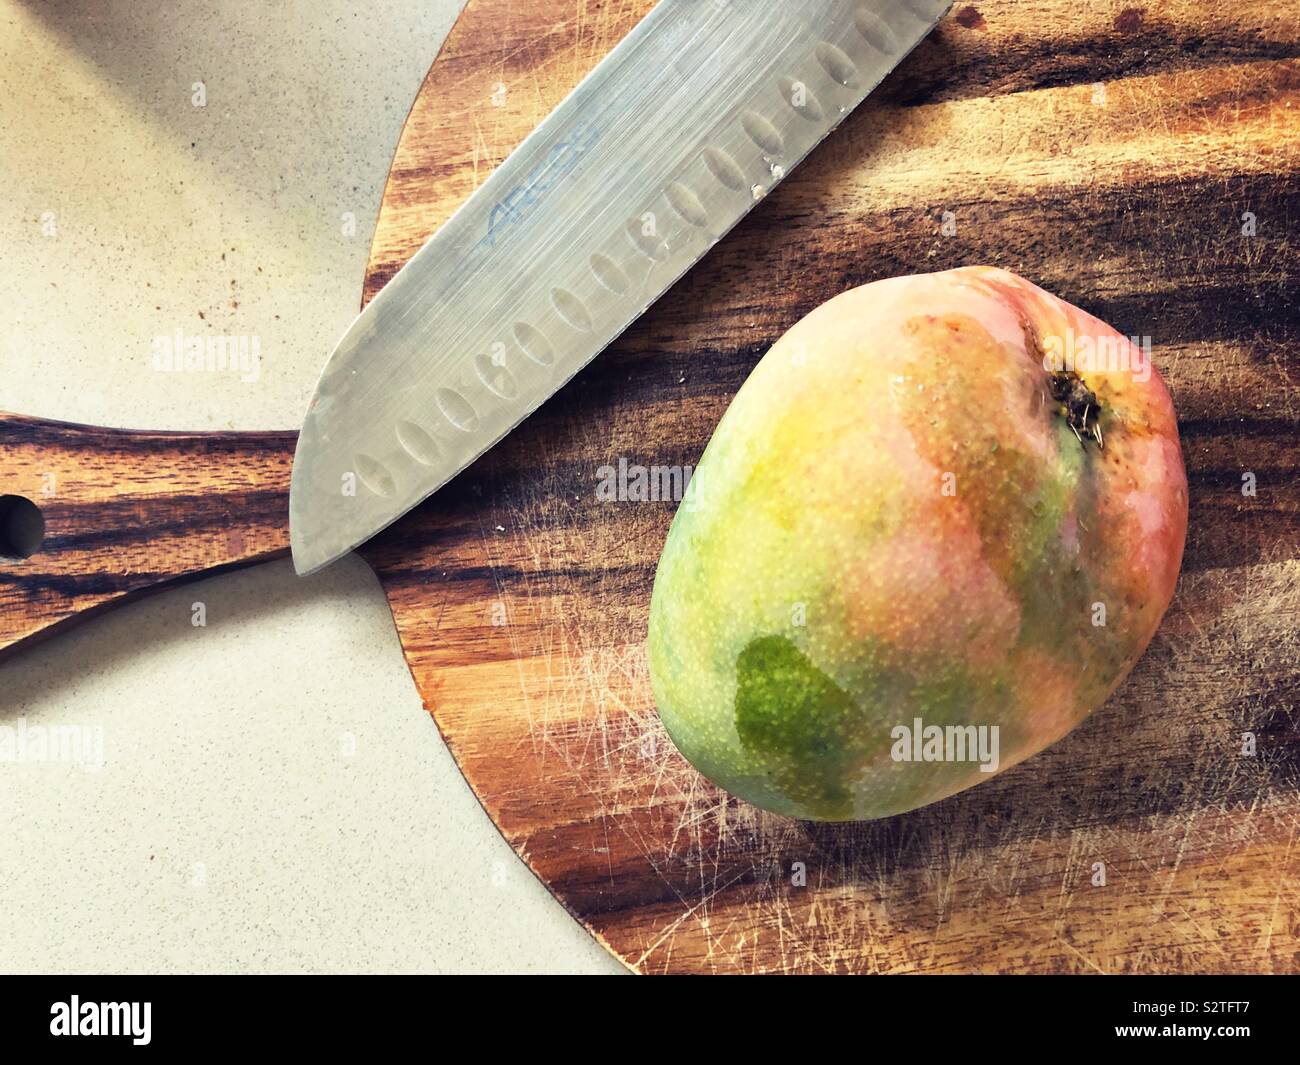 Mango on cutting board Banque D'Images